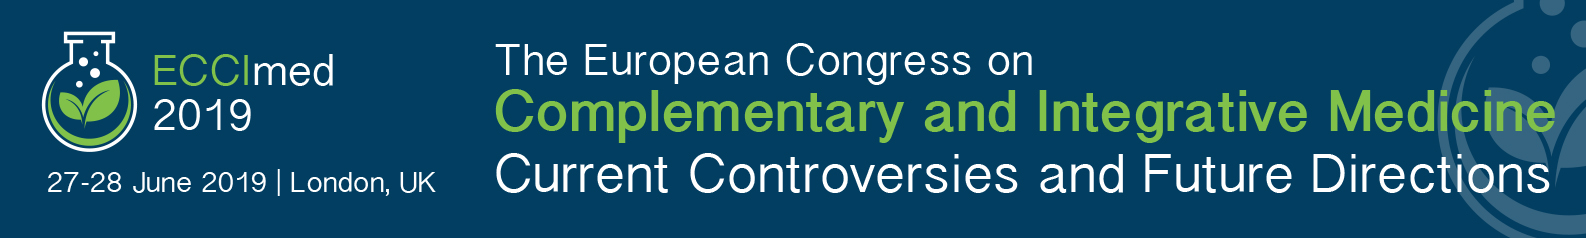 The European Congress on Complementary and Integrative Medicine - Current Controversies and Future Directions (ECCImed 2019)